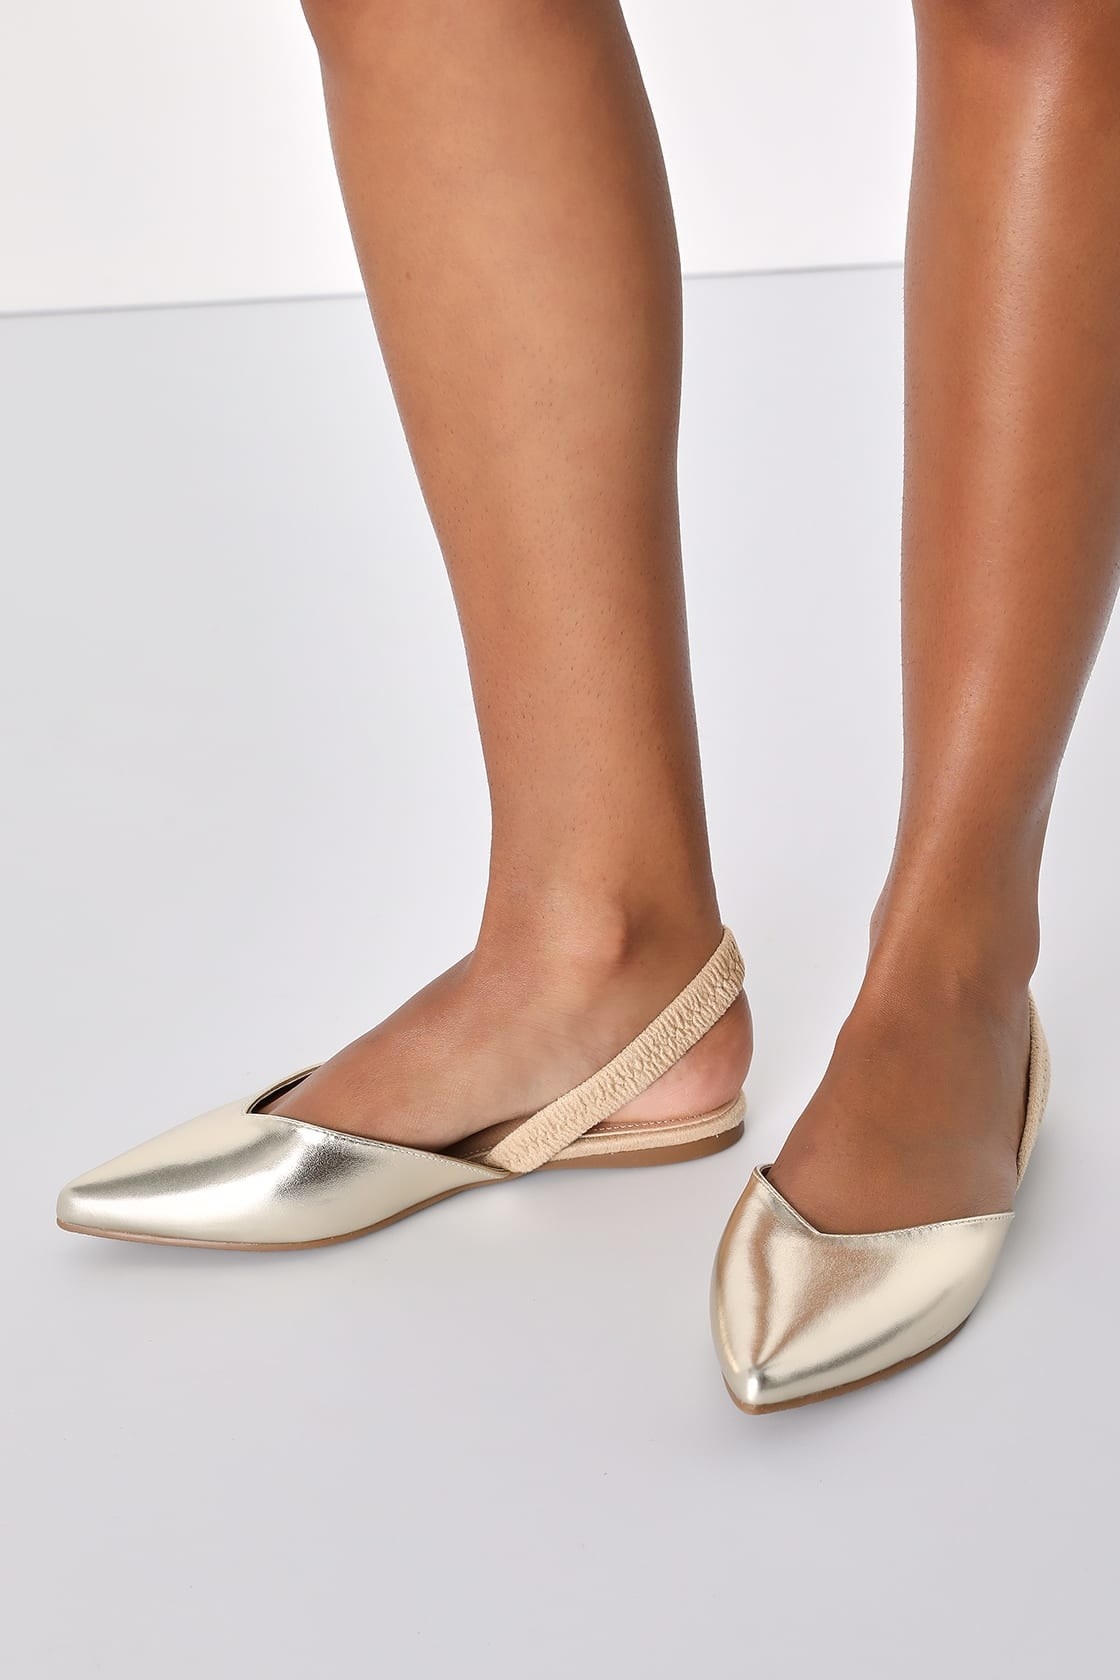 A pair of gold flats